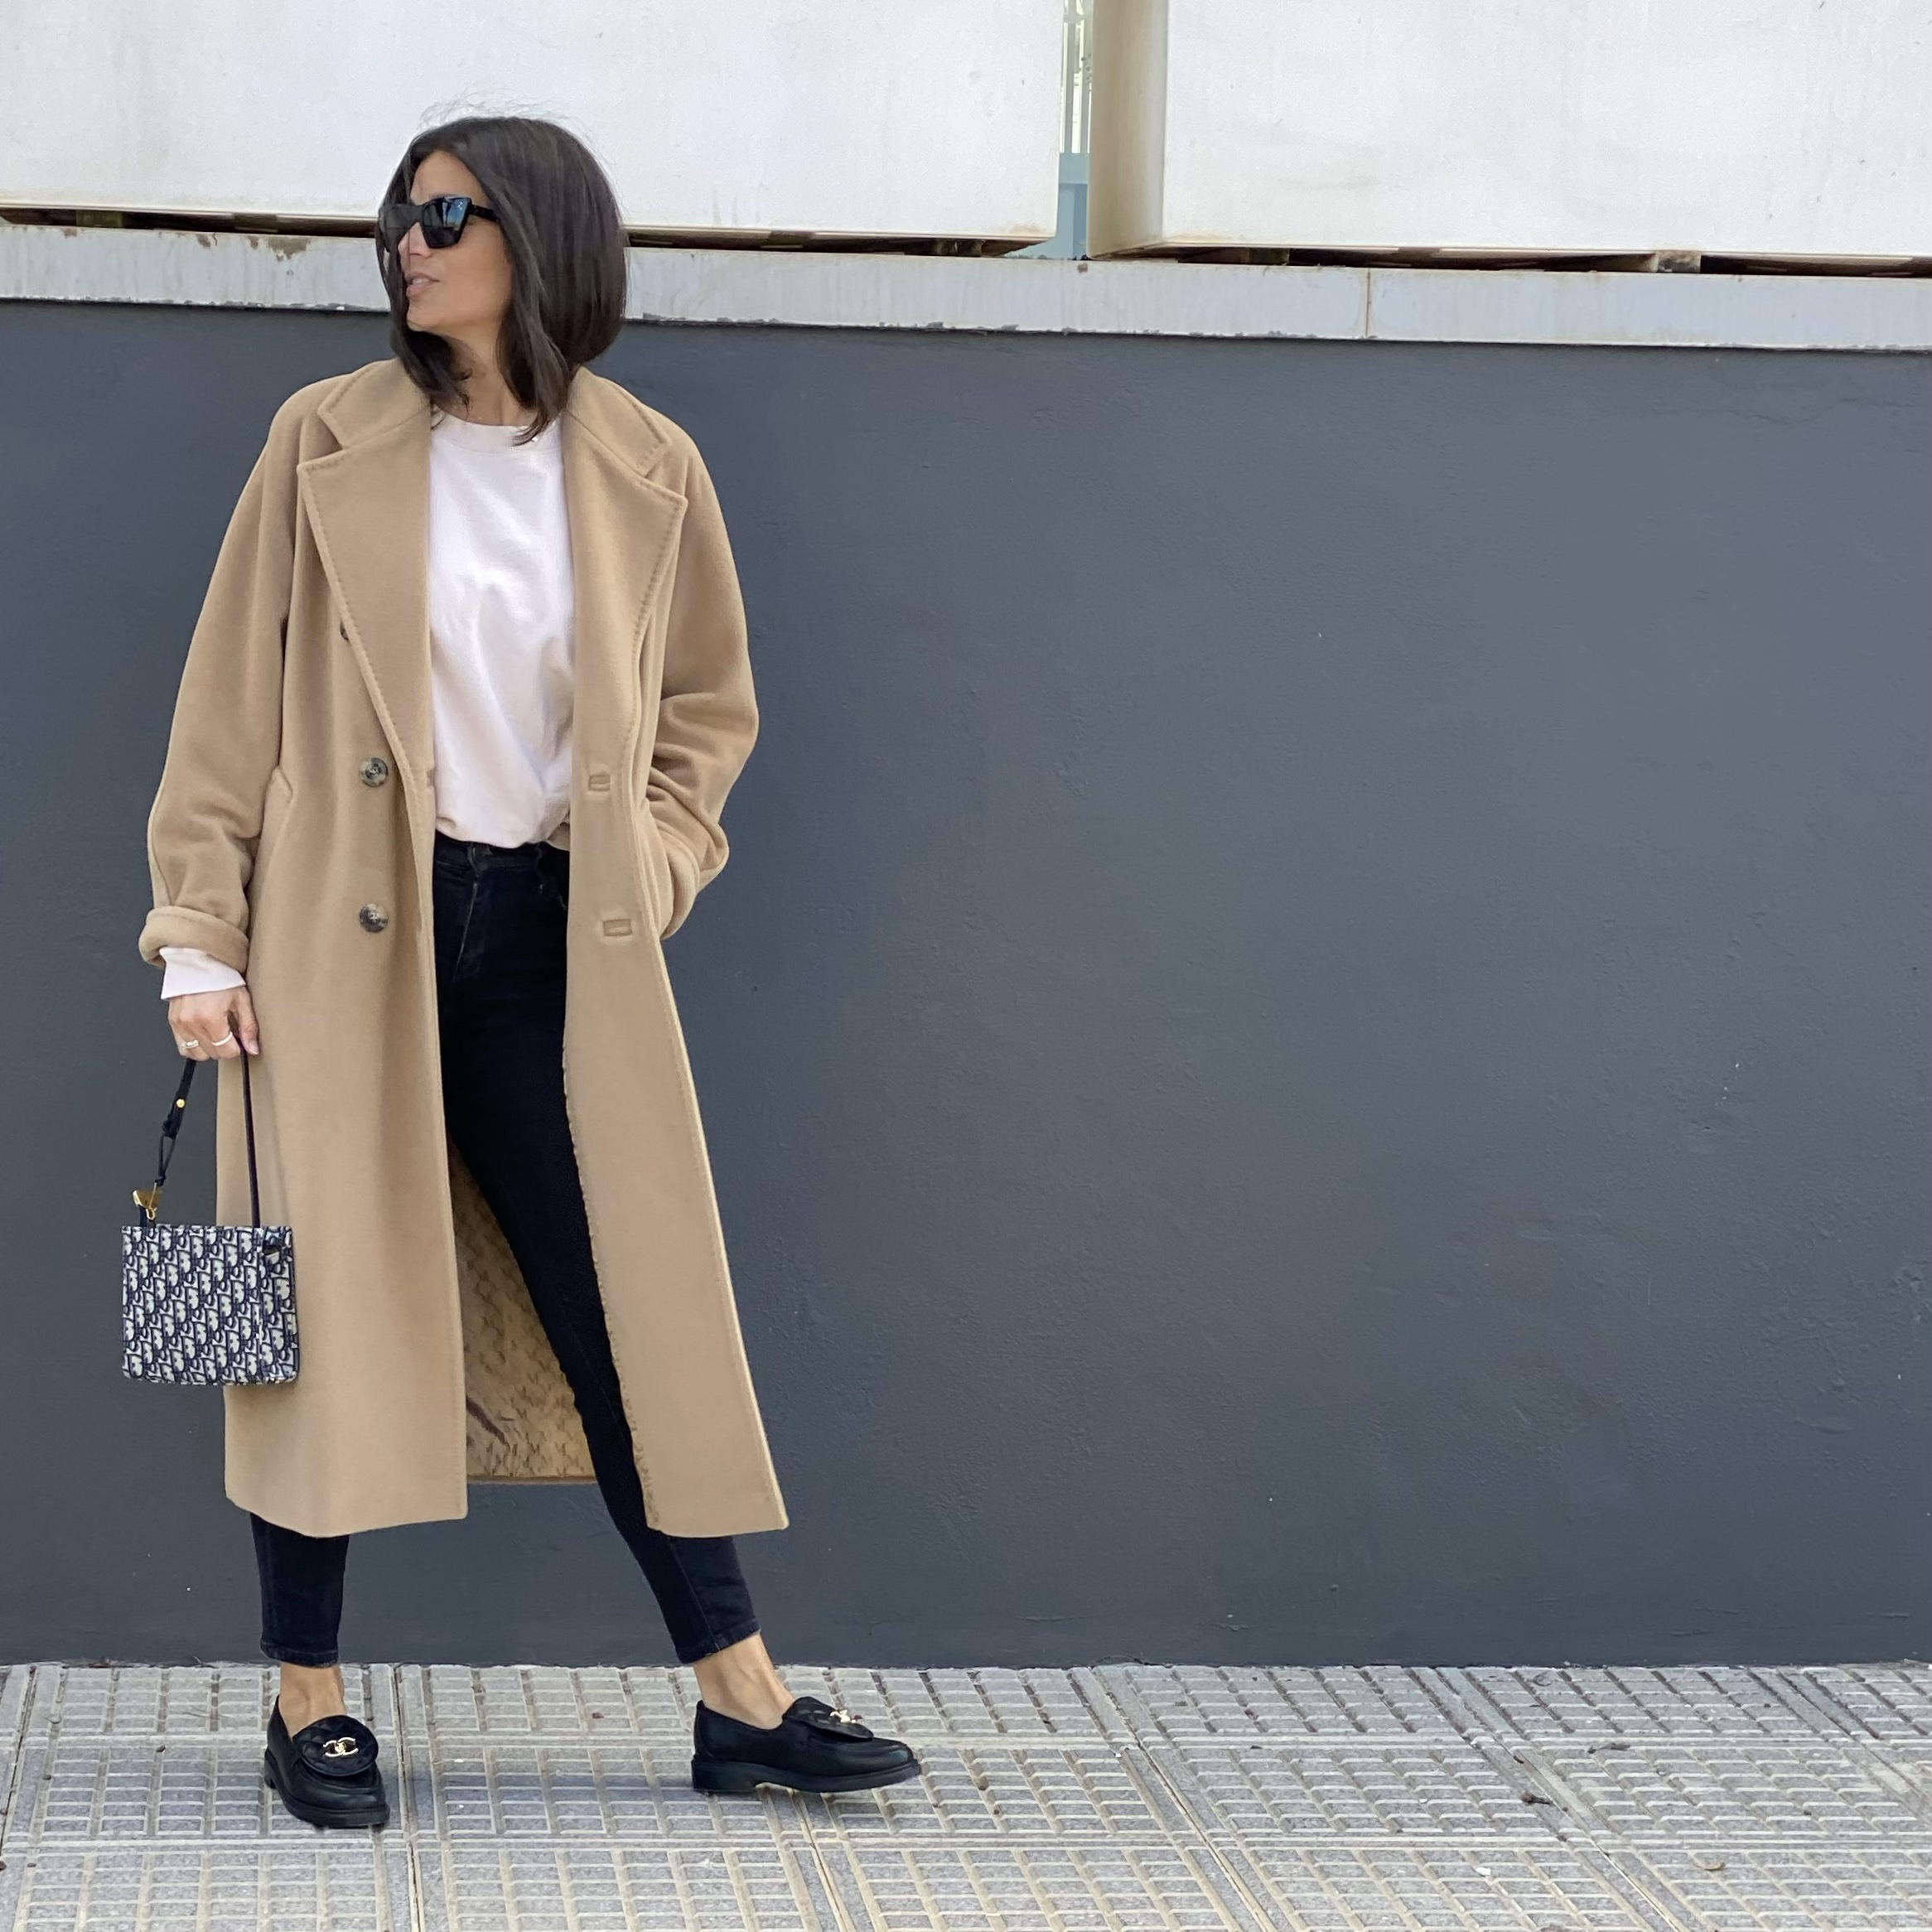 styling stories Max Mara madame icon coat mediterranean winter Ibiza wear look outfitpost stylingstories.nl